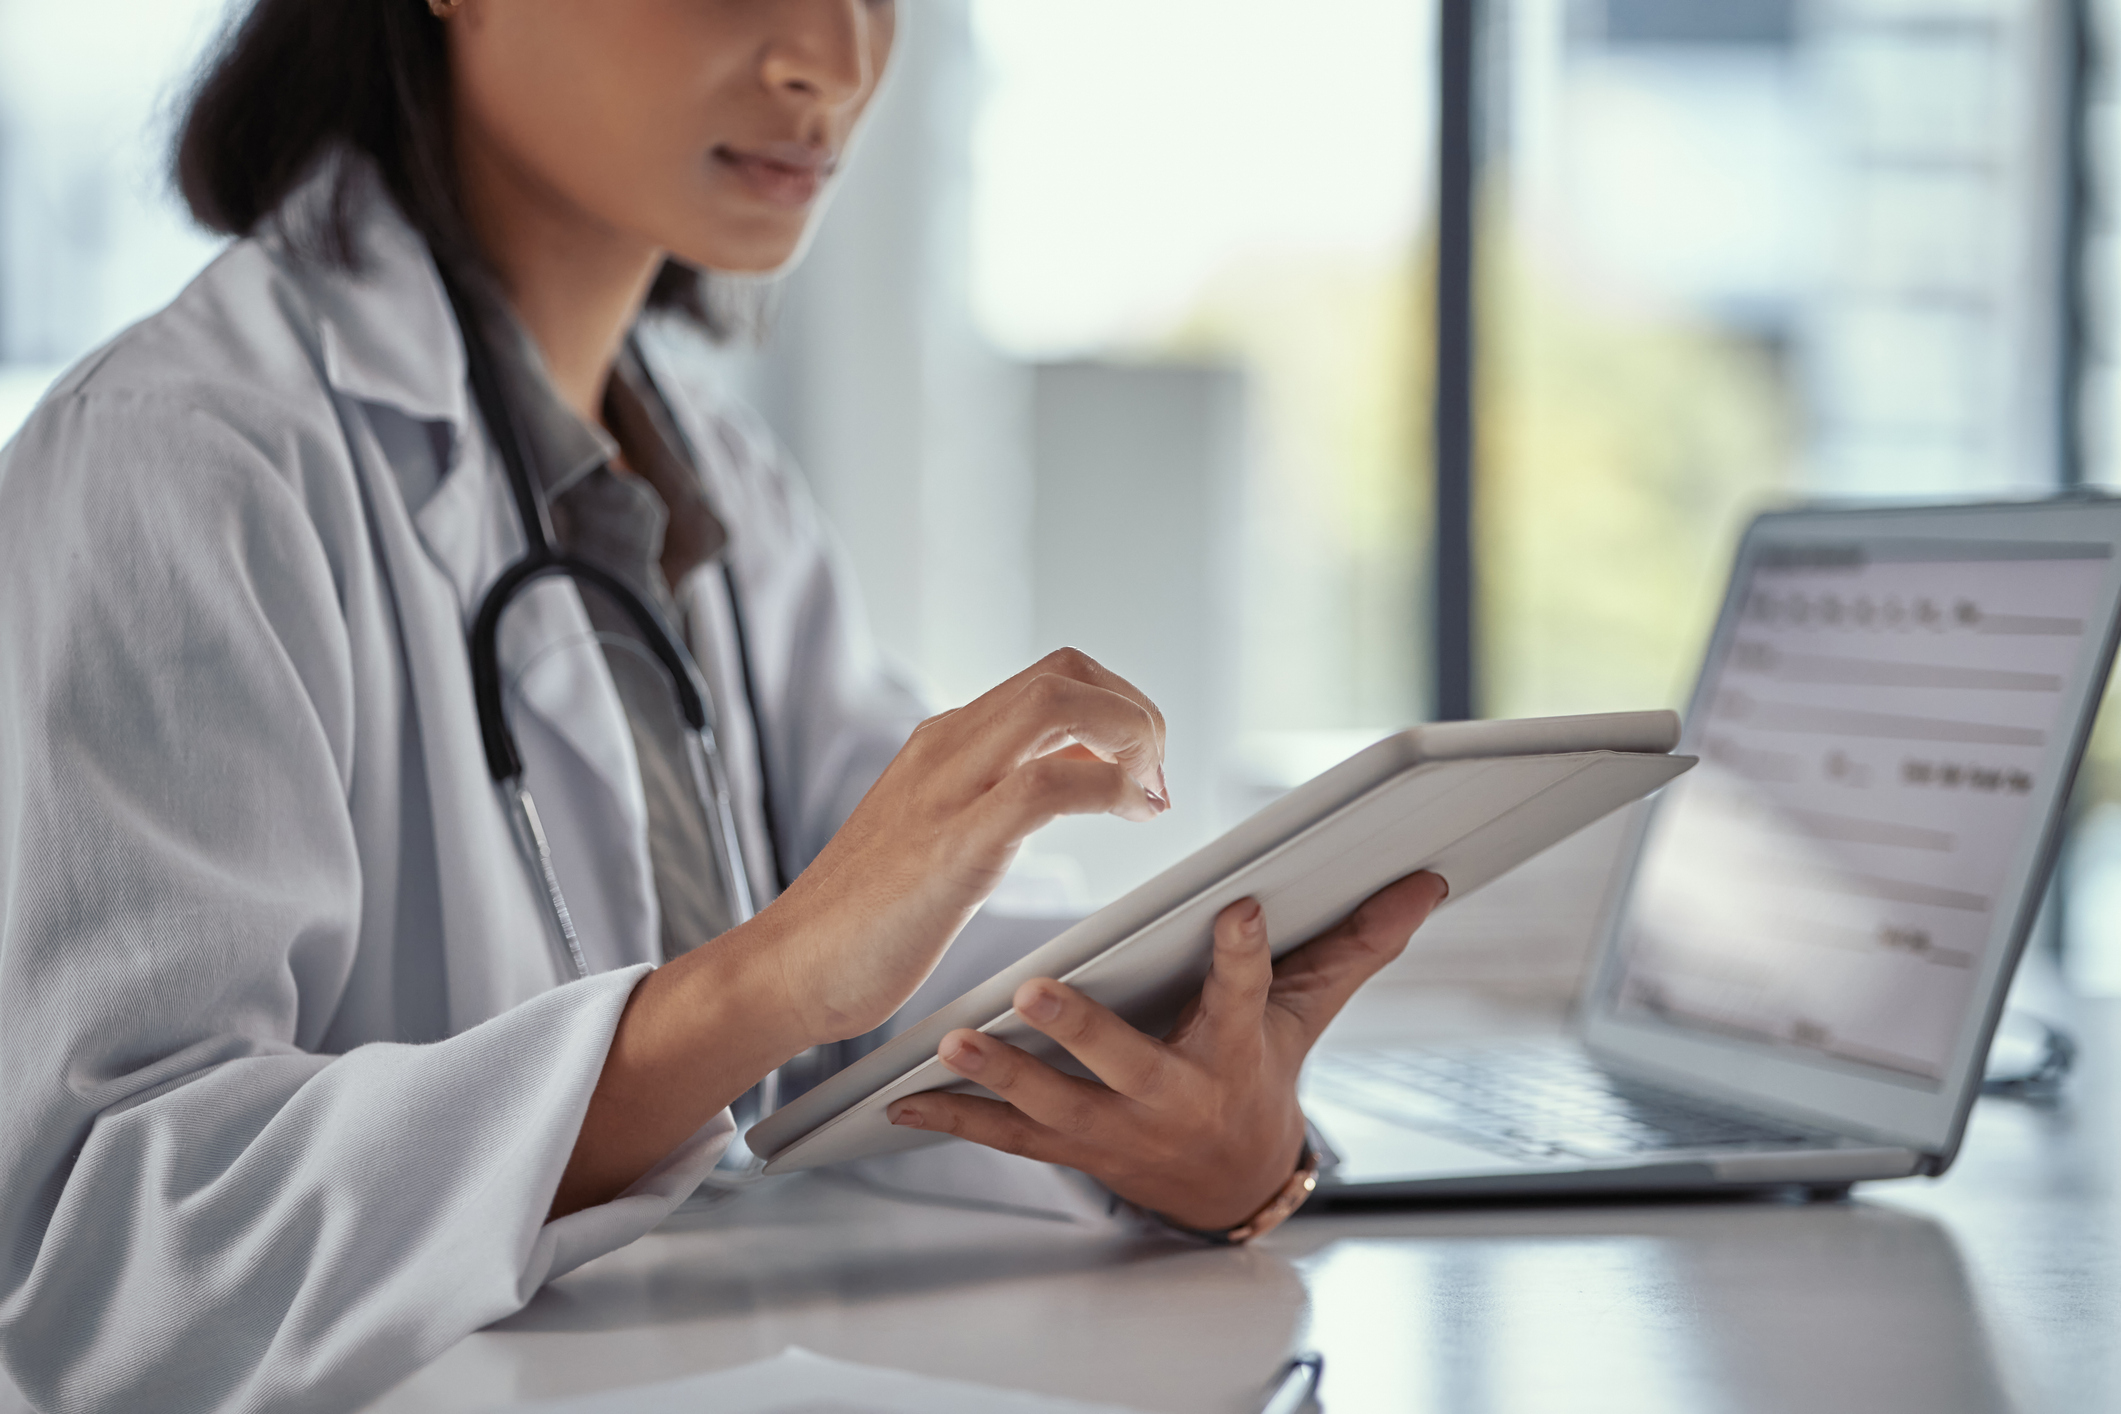 EHRs and patient engagement